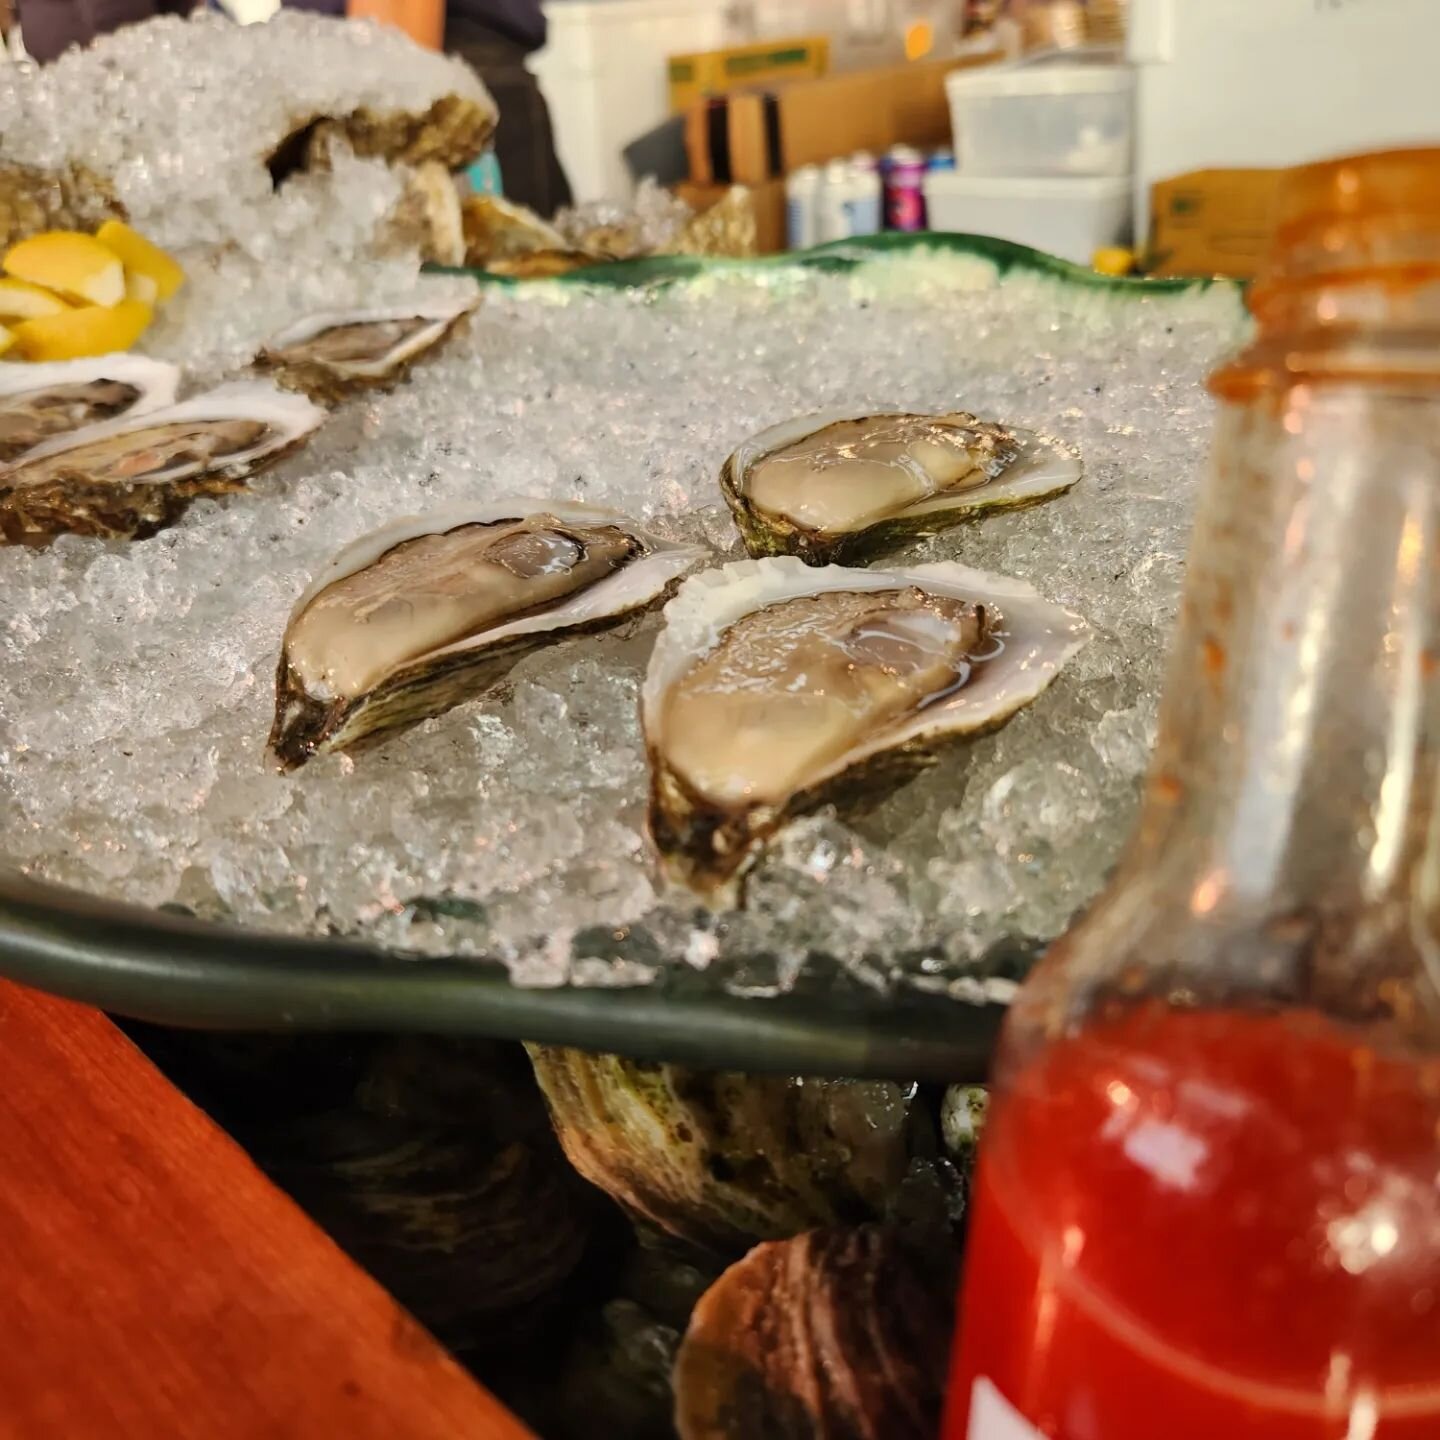 Have you booked your holiday raw bar yet?
-
We still have a few dates available.
-
This year's package includes a full interactive raw bar with oysters, littlenecks, scallop ceviche, tuna tartare, smoked mussels escabeche, and smoked Maine shrimp. 
-